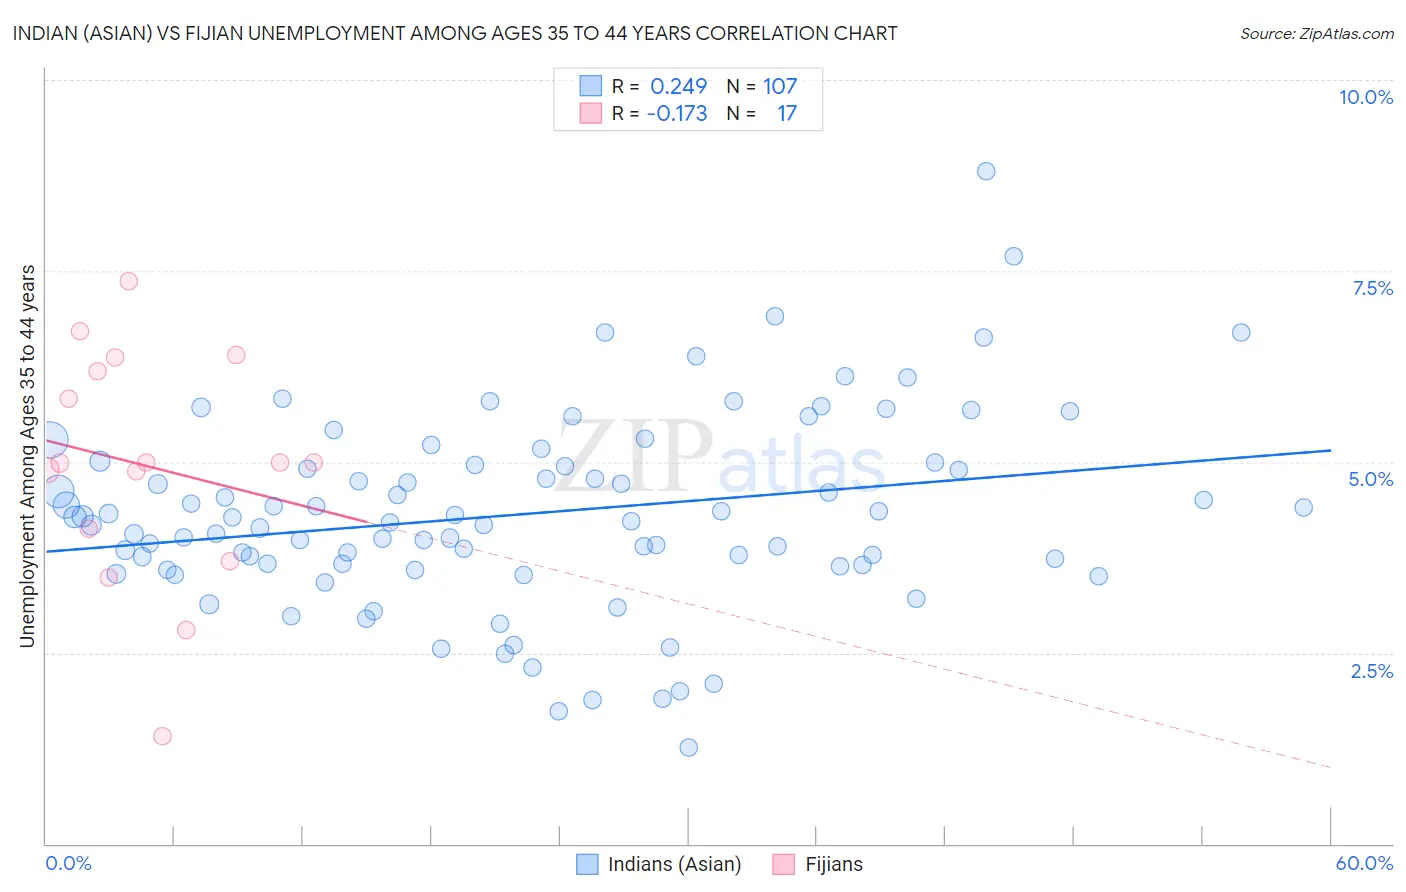 Indian (Asian) vs Fijian Unemployment Among Ages 35 to 44 years